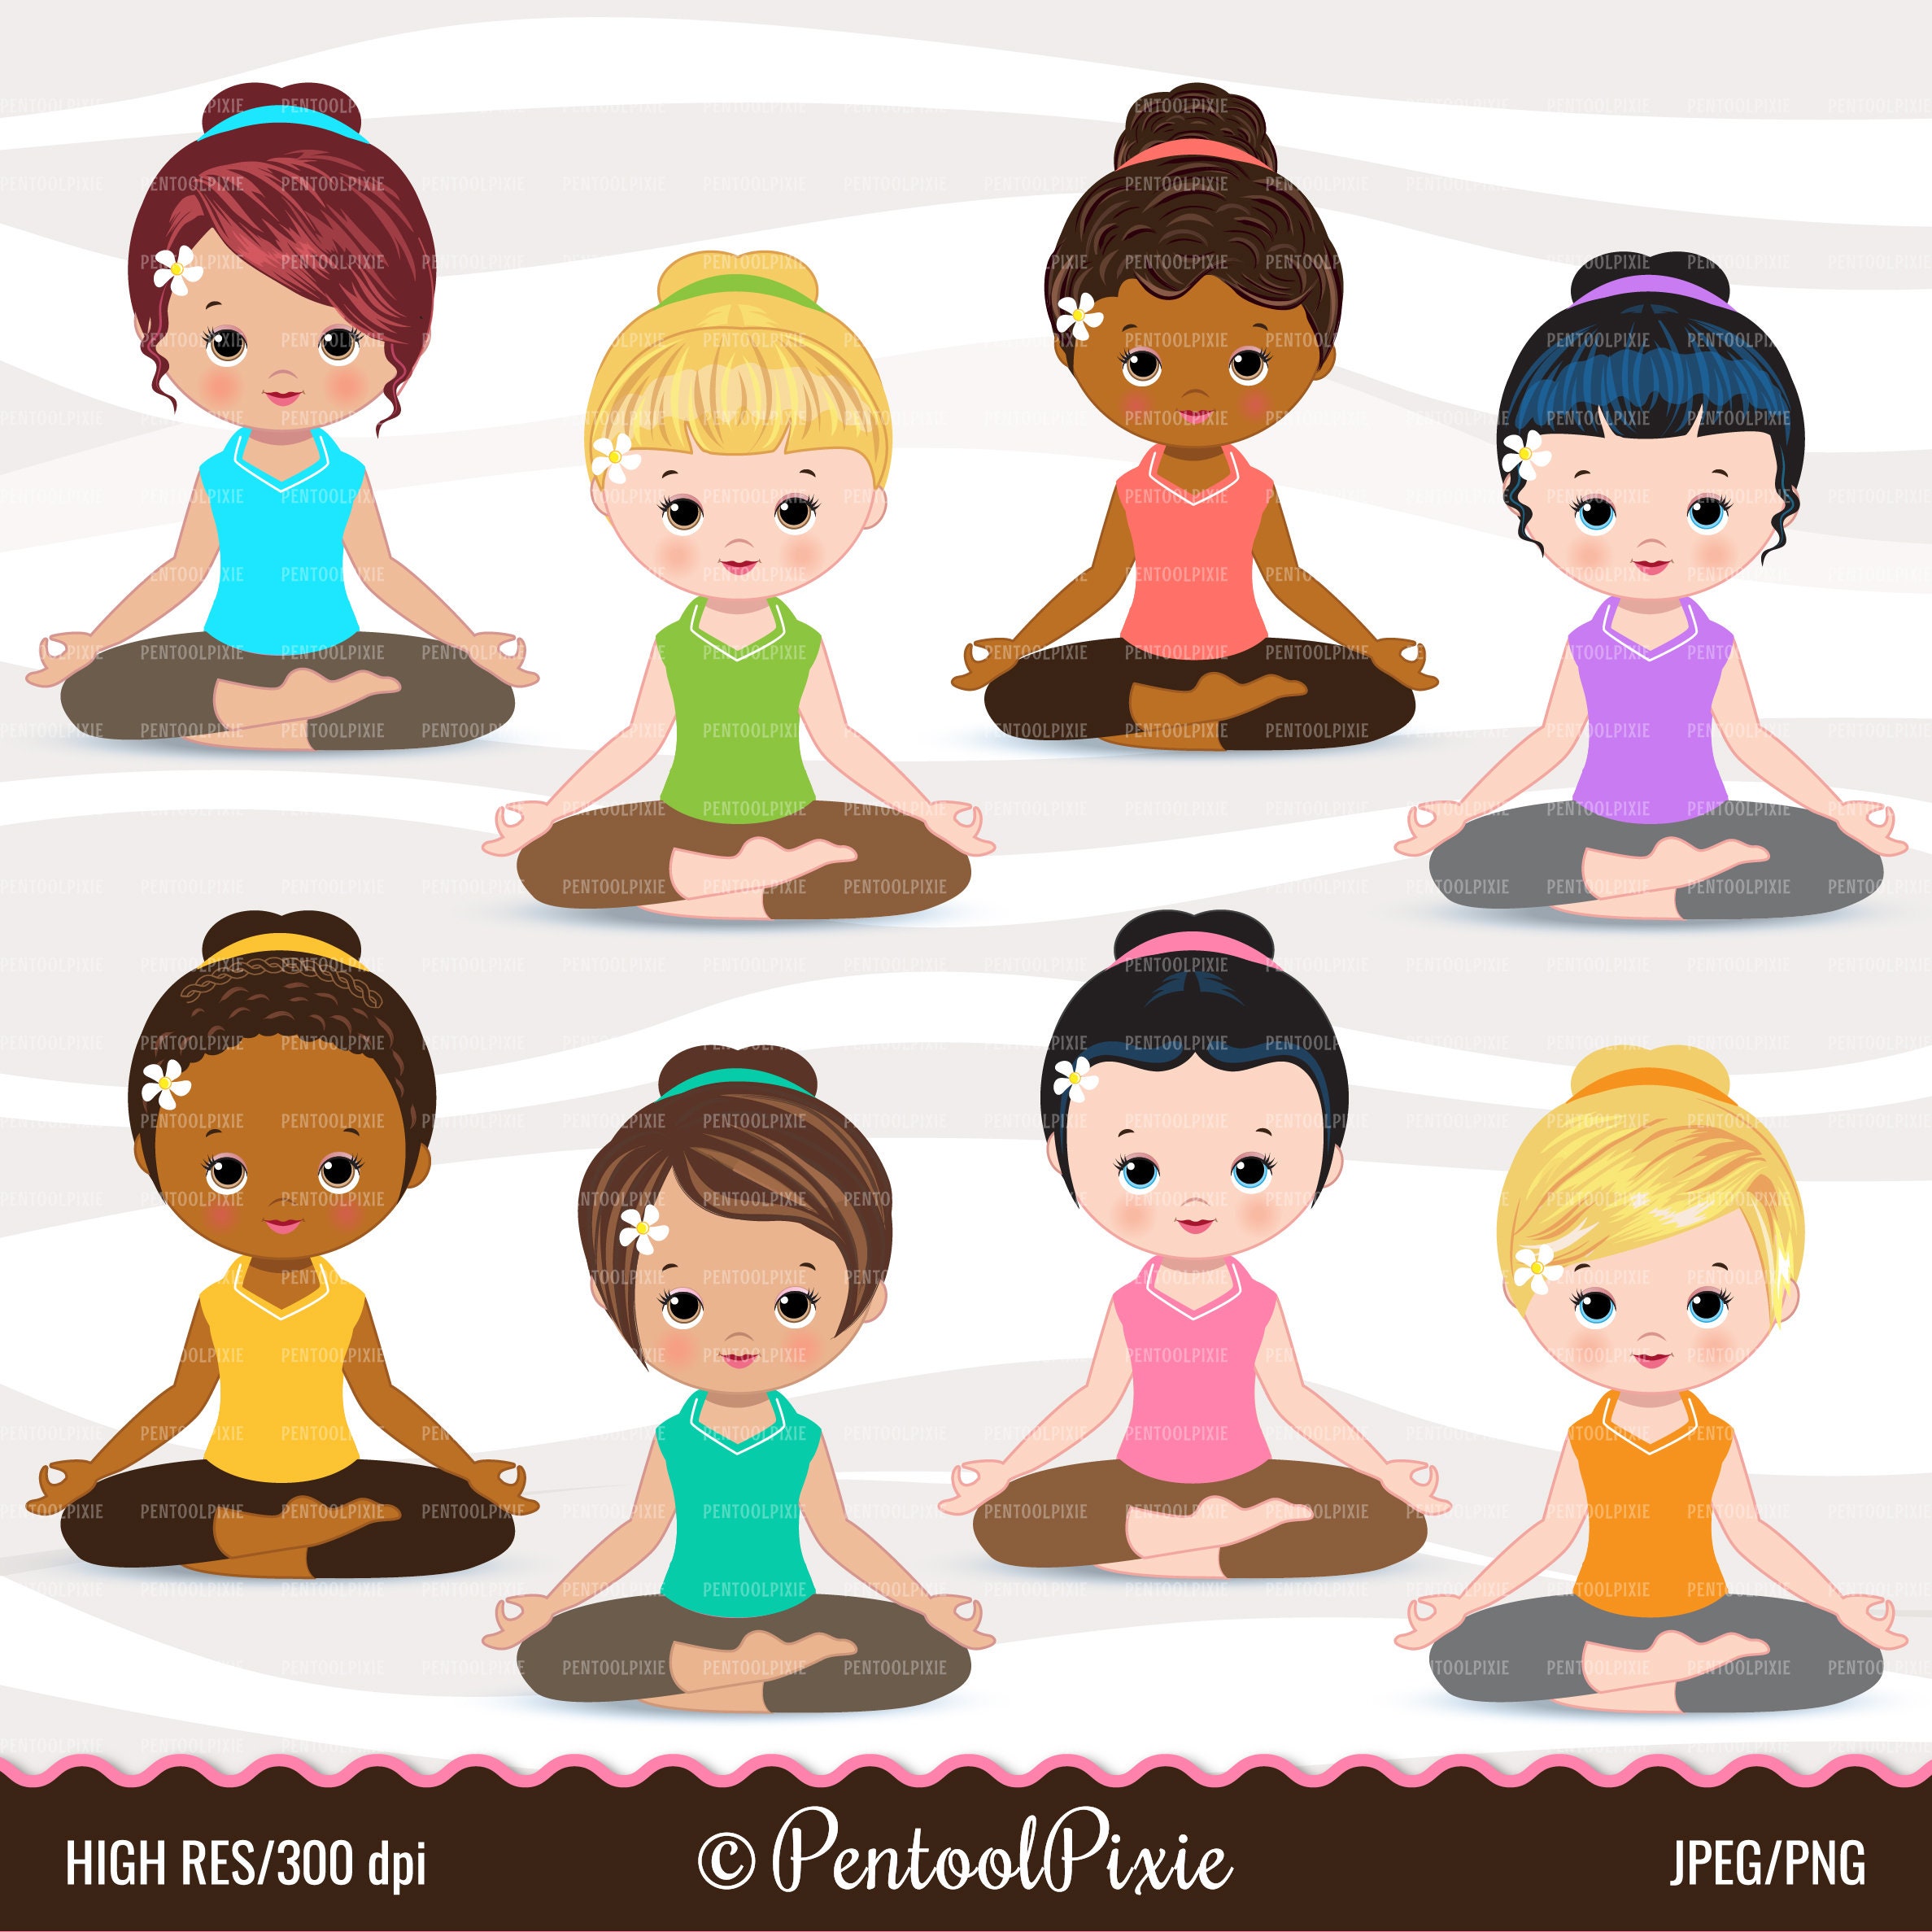 exercise class clipart